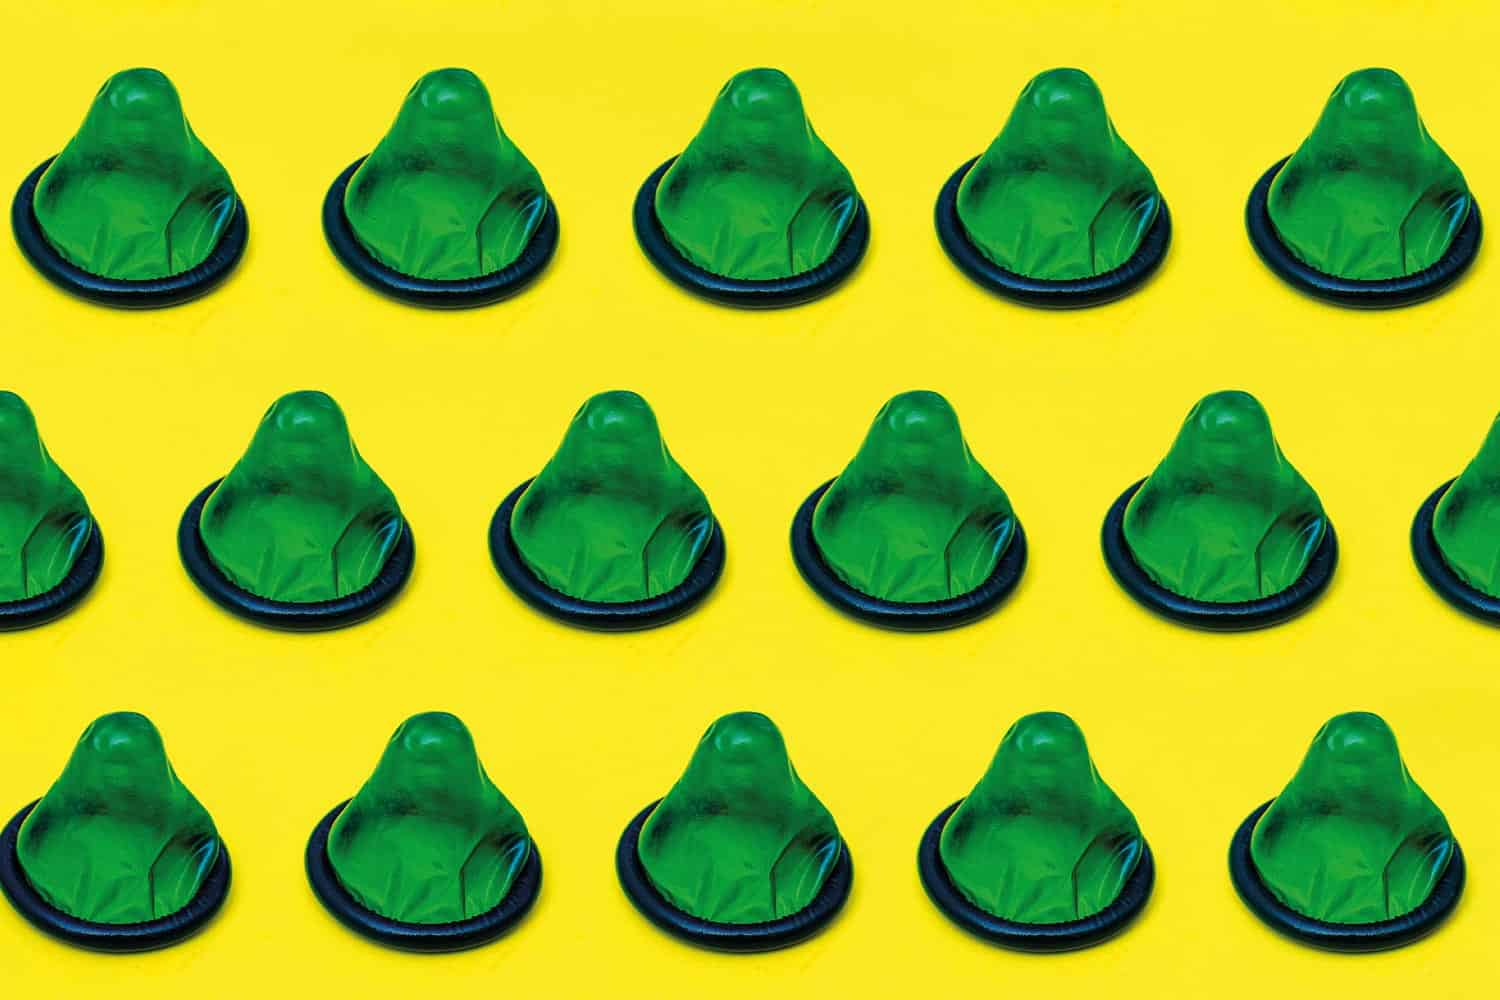 A number of green condoms on a yellow background.